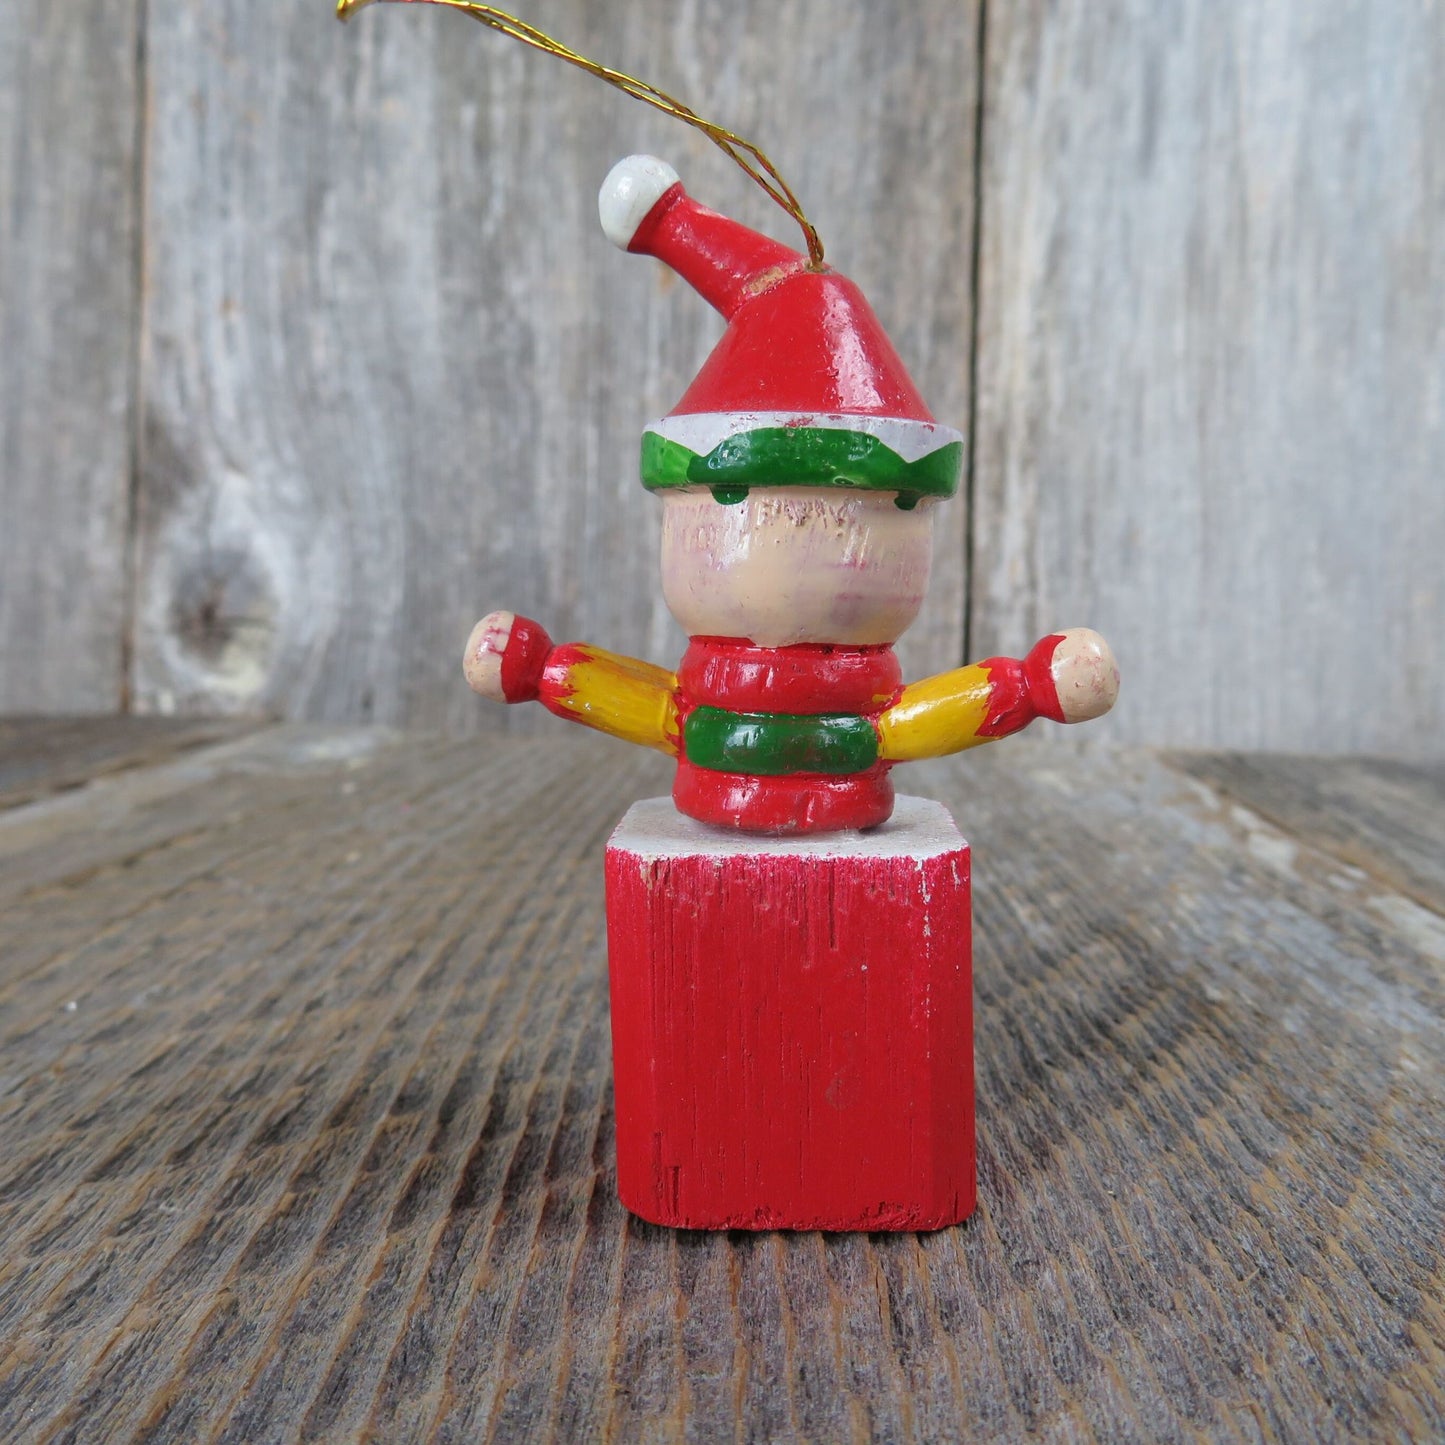 Vintage Jack In A Box Wood Ornament Clown Red Green Wooden Christmas Candy Cane